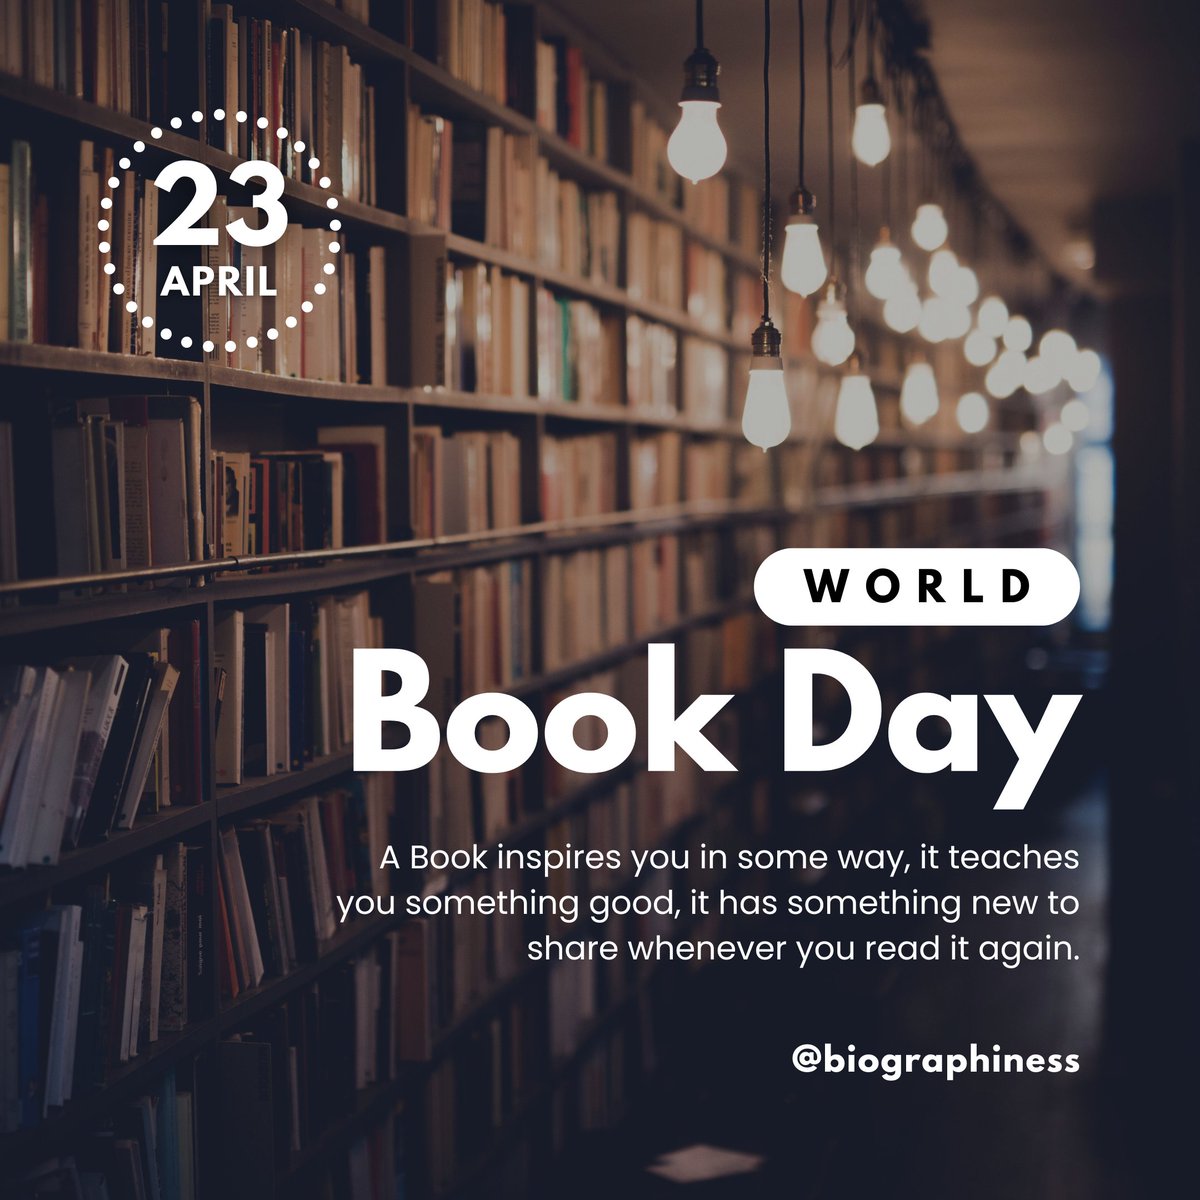 A journey of a thousand worlds begins with a single page. Happy World Book Day! 🚀📚
Follow👉 @biographiness

#Biographiness #Biograghines #WorldBookDay #BookDay #BookwormsCelebrate #LiteraryJourney #ReadersParadise #PageTurnerParty #BookishBliss #EpicReads #LibraryLove